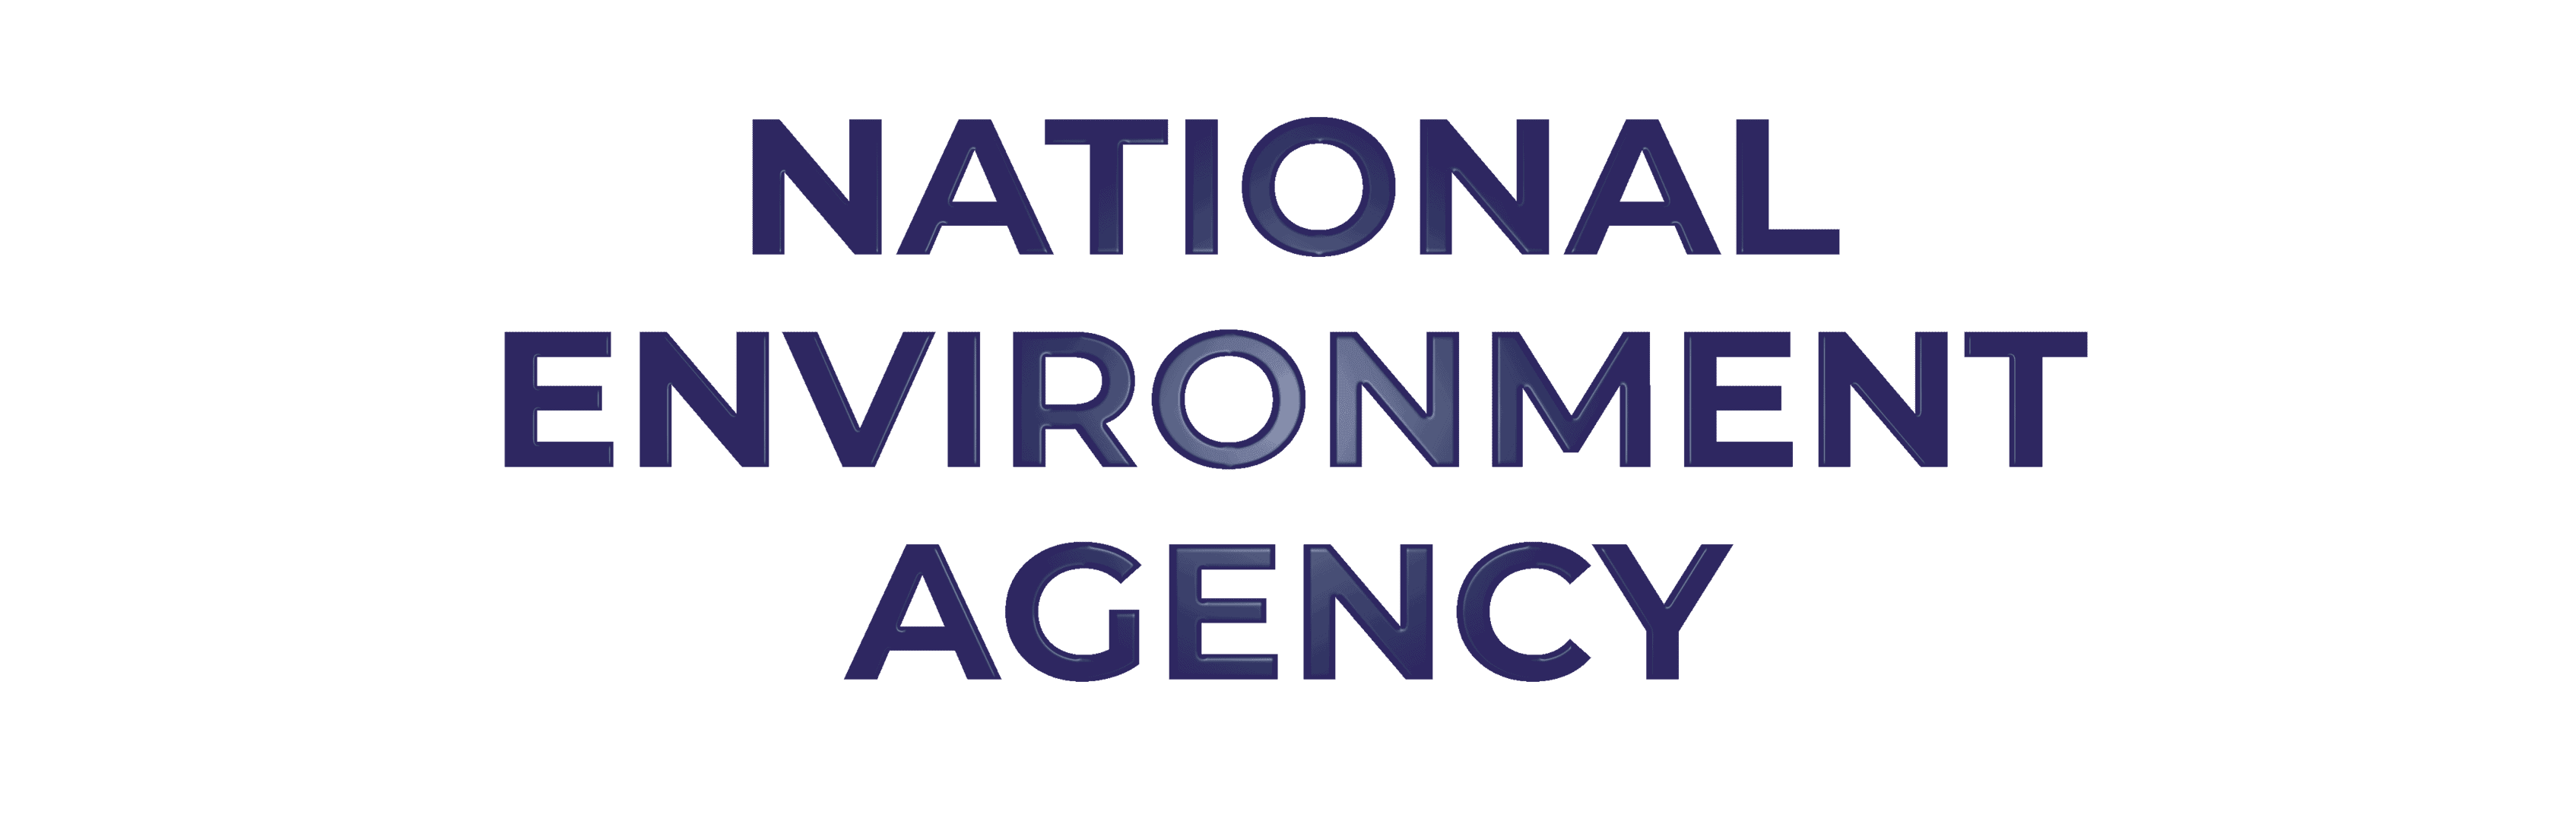 National Environment Agency Client